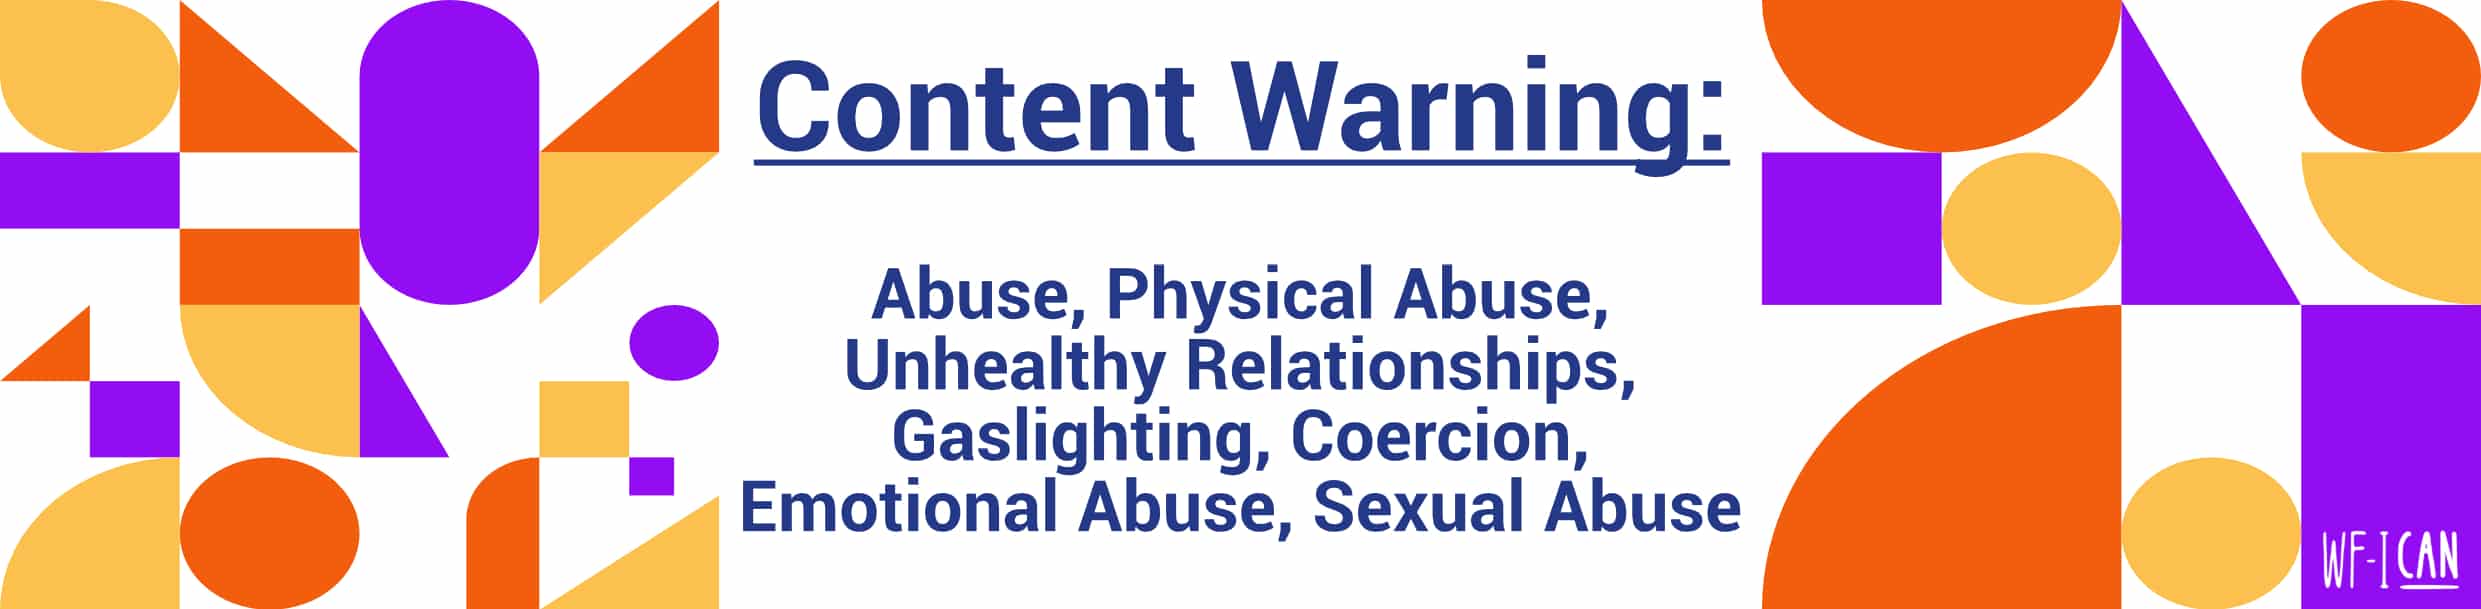 wfican content warning- unhealthy relationships, abuse, physical abuse, coercive control, emotional abuse, gaslighting.